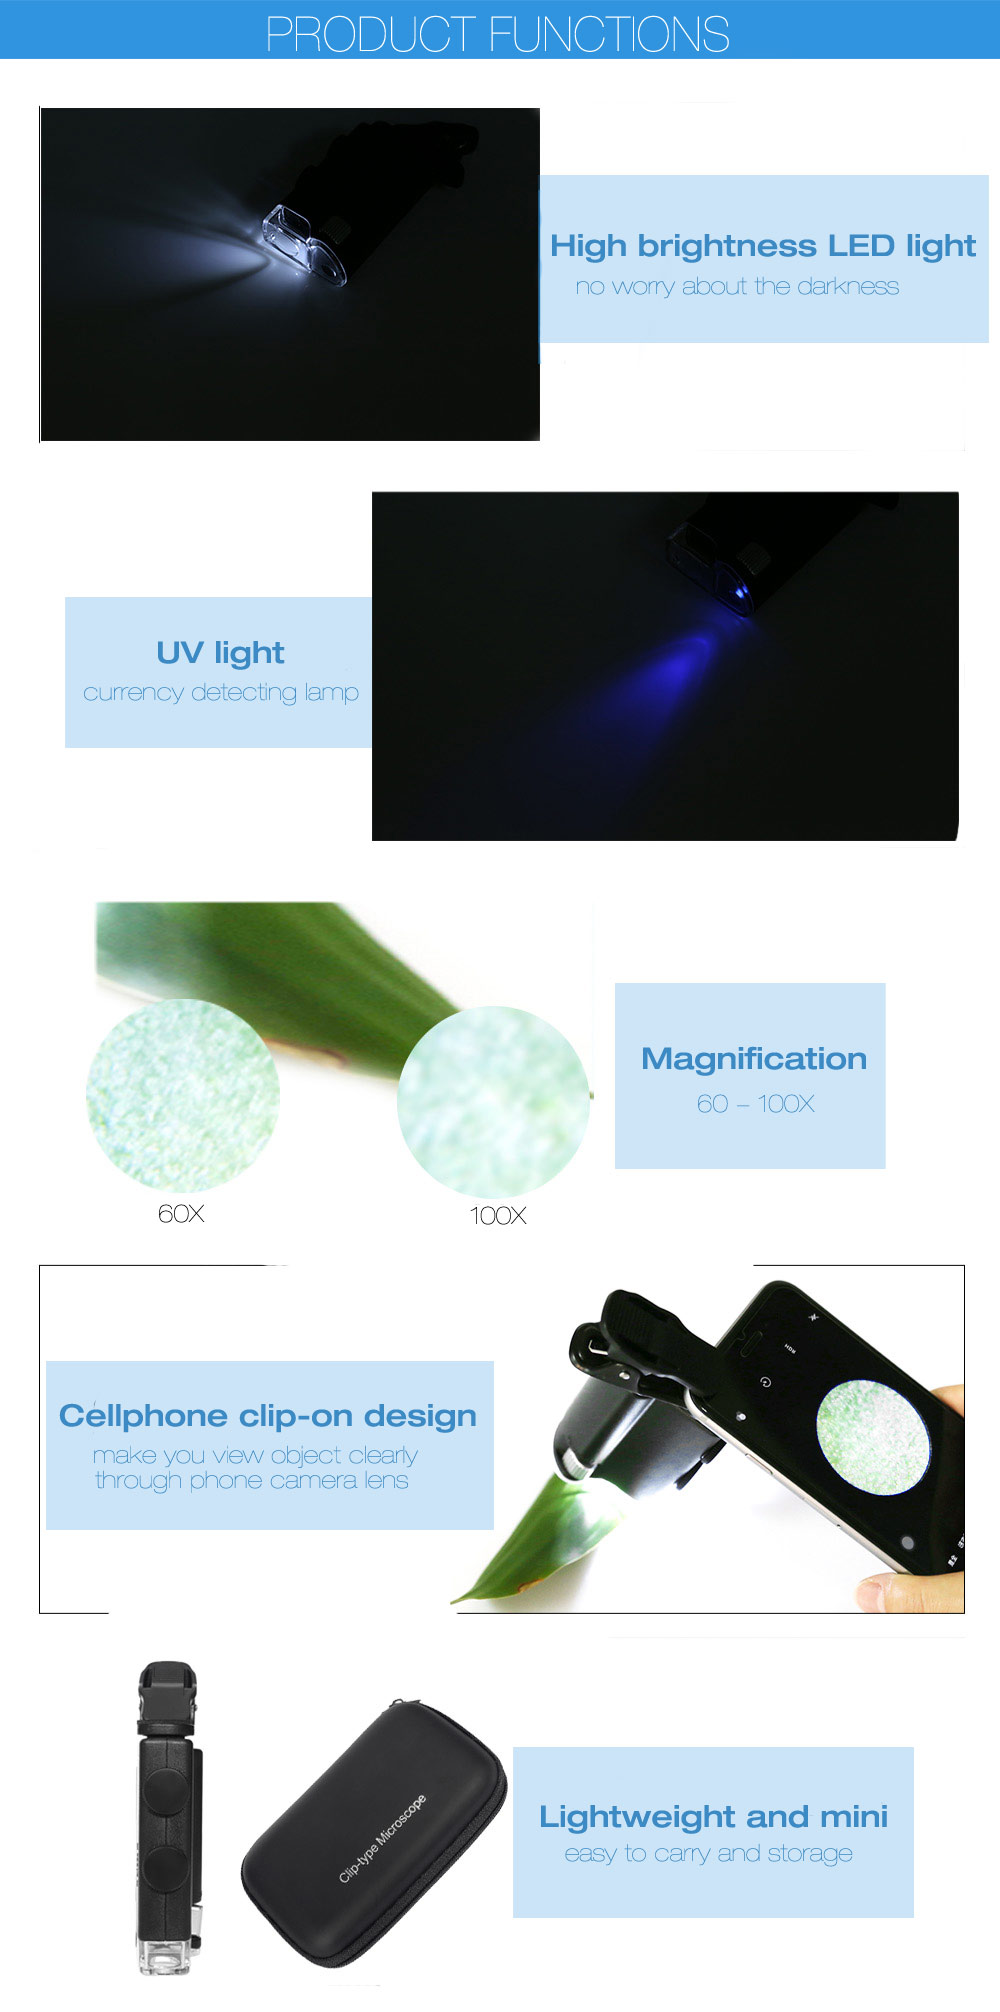 Beileshi 60 - 100X LED Adjustable Cellphone Clip-on Microscope with Currency-detecting Function